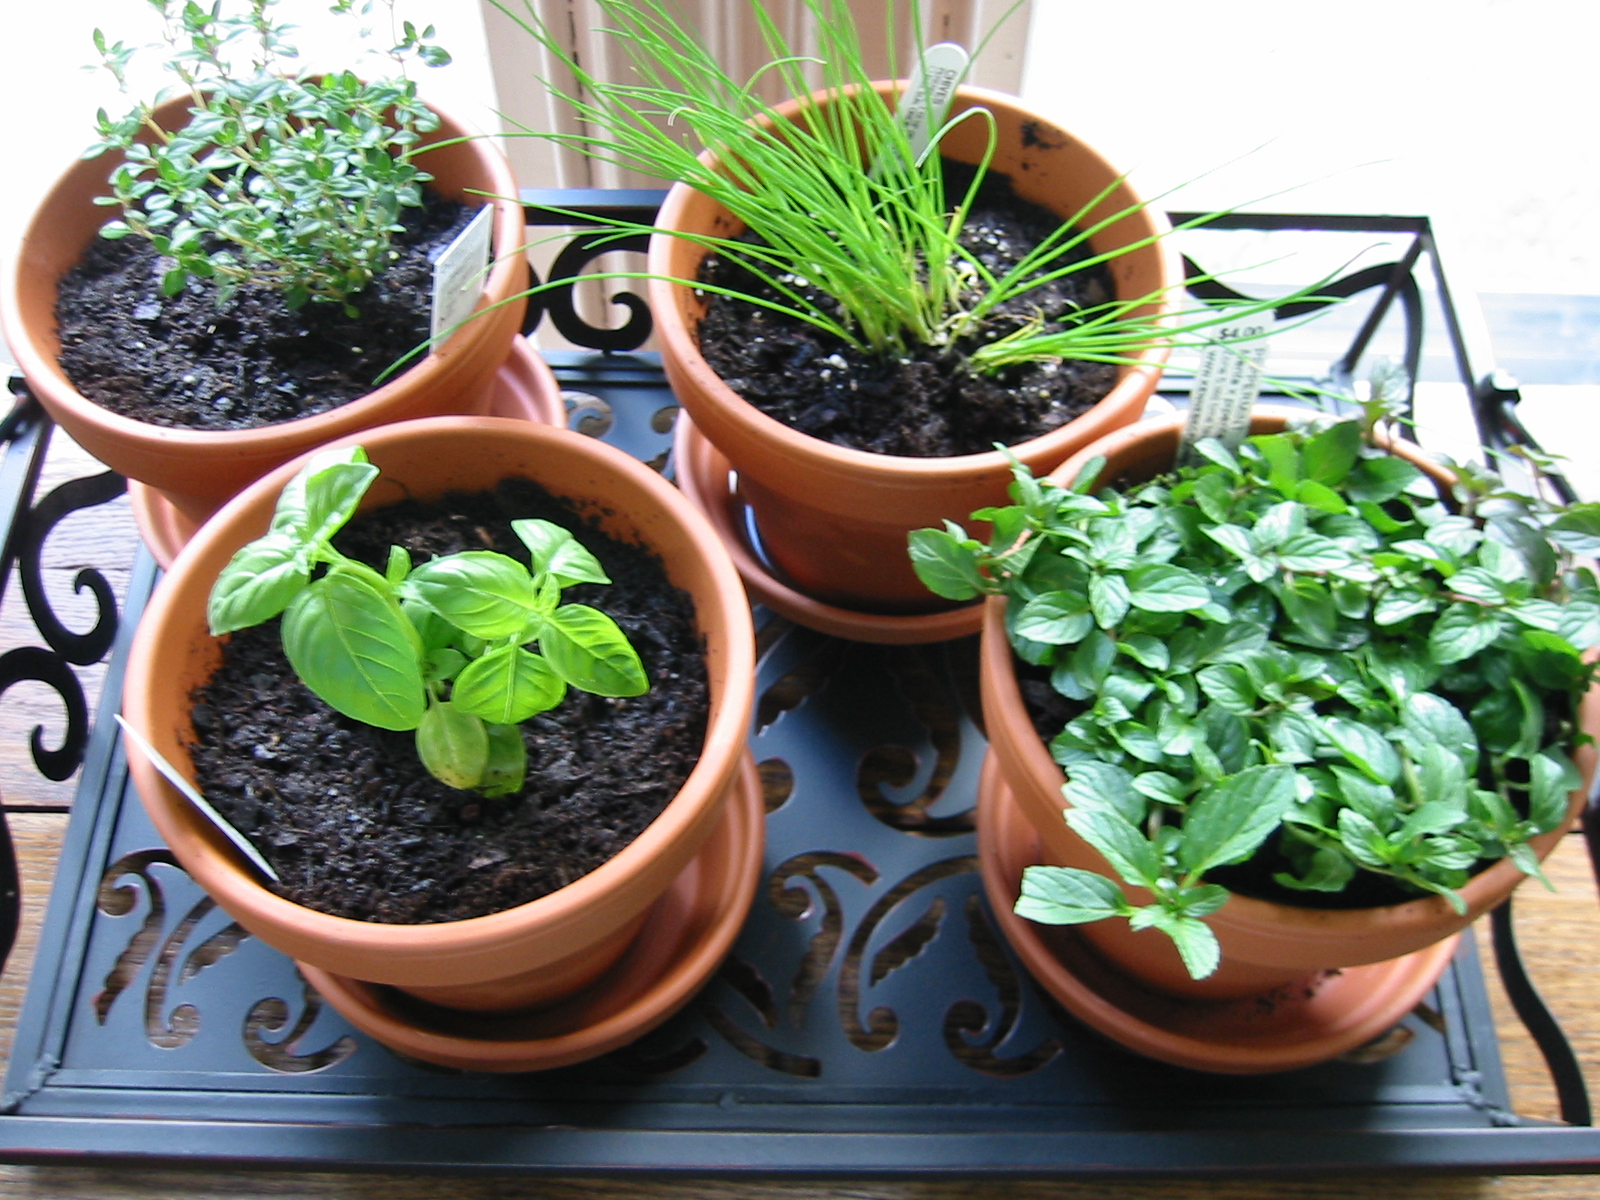 From pot to table, easy indoor herbs spice up cooking